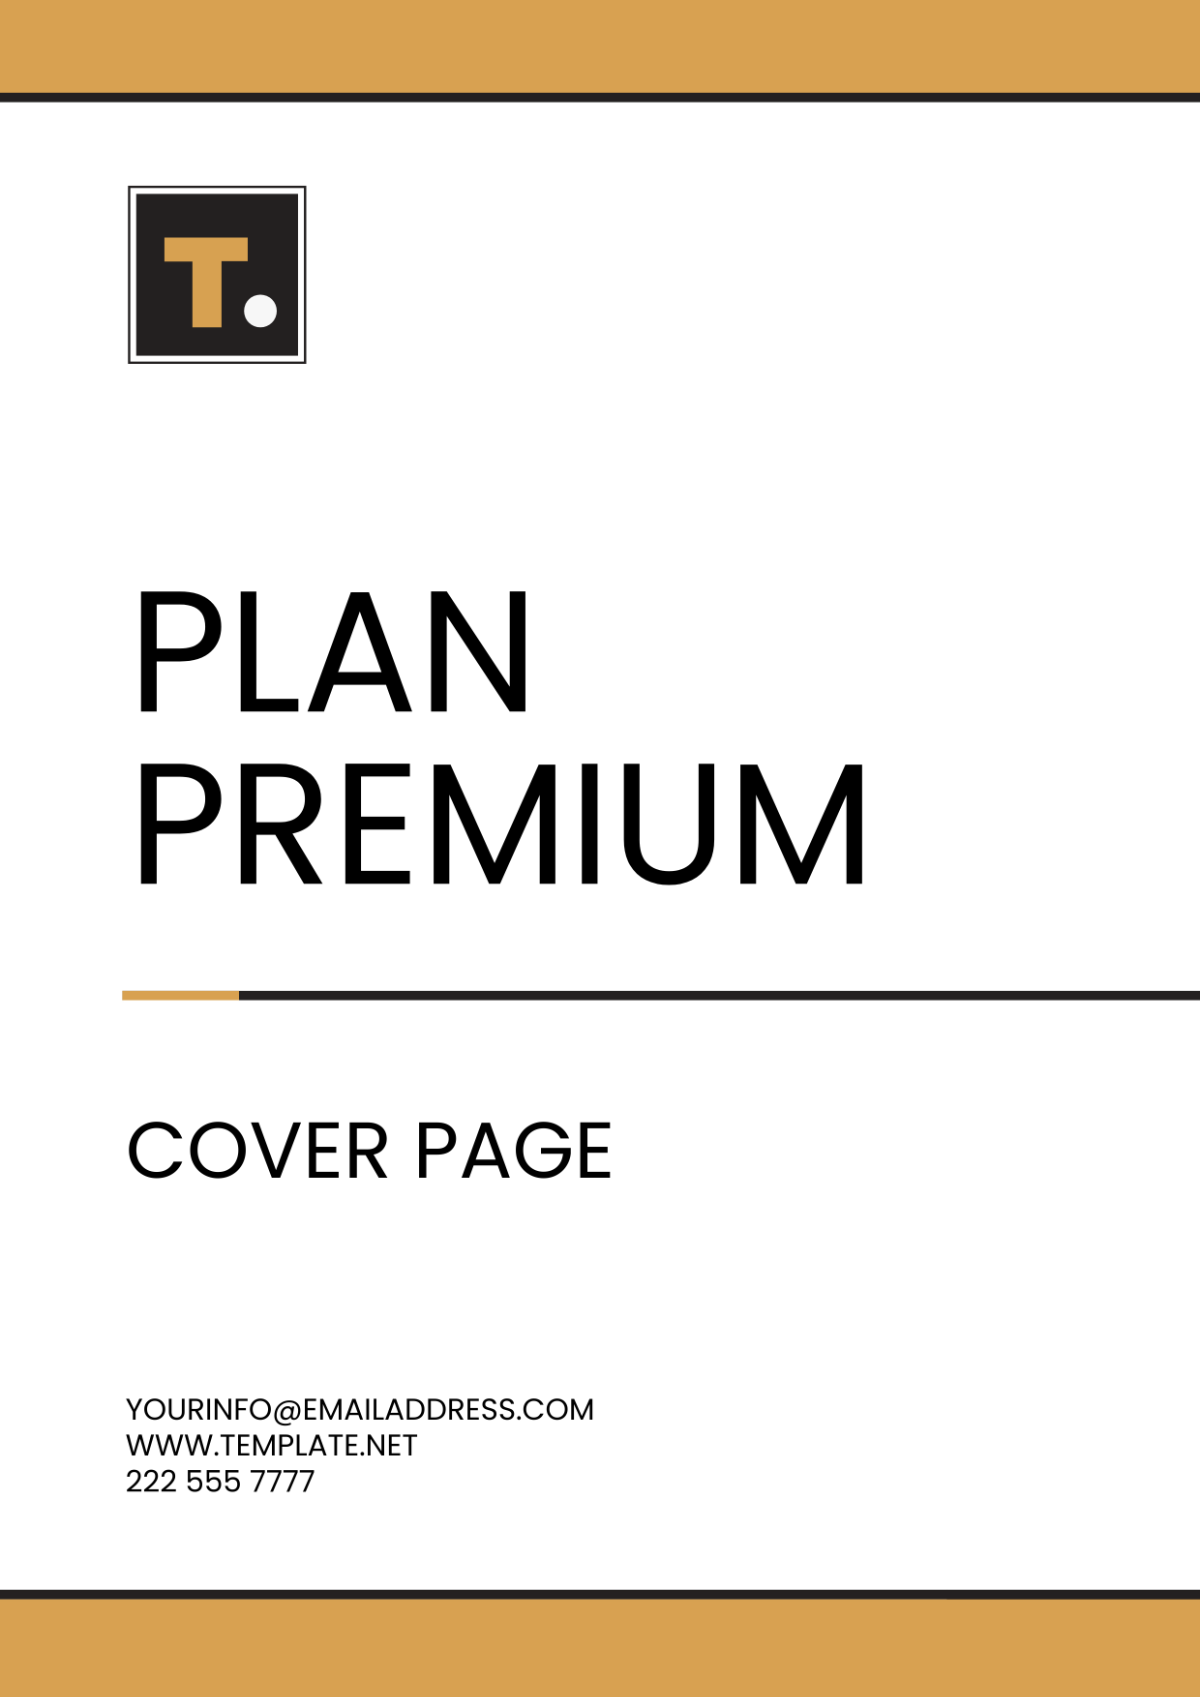 Free Plan Premium Cover Page Template